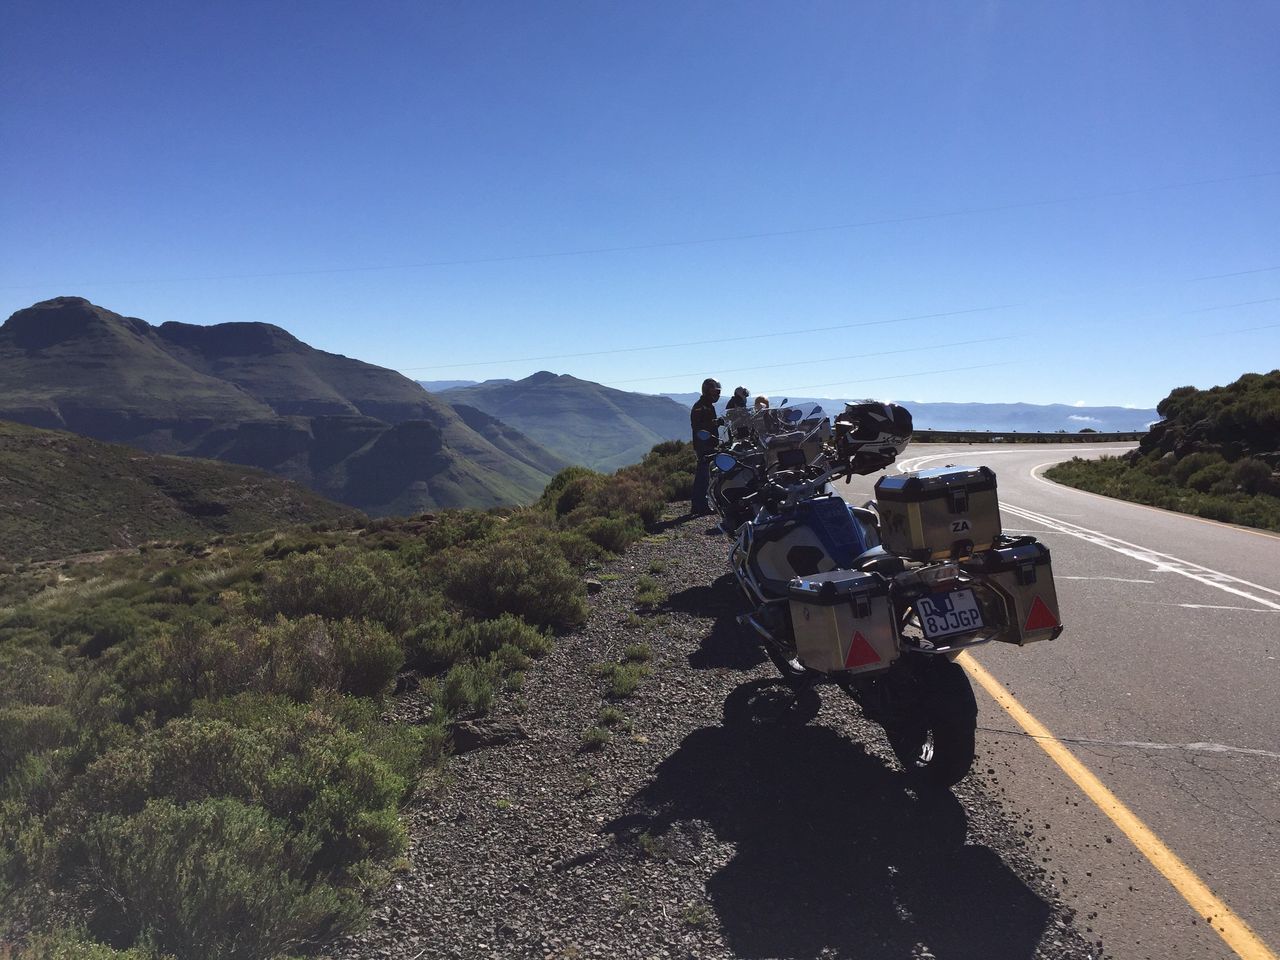 More twisties and switchbacks than you could ever imagine...elevation of 2,200 metres...beautiful scenery!